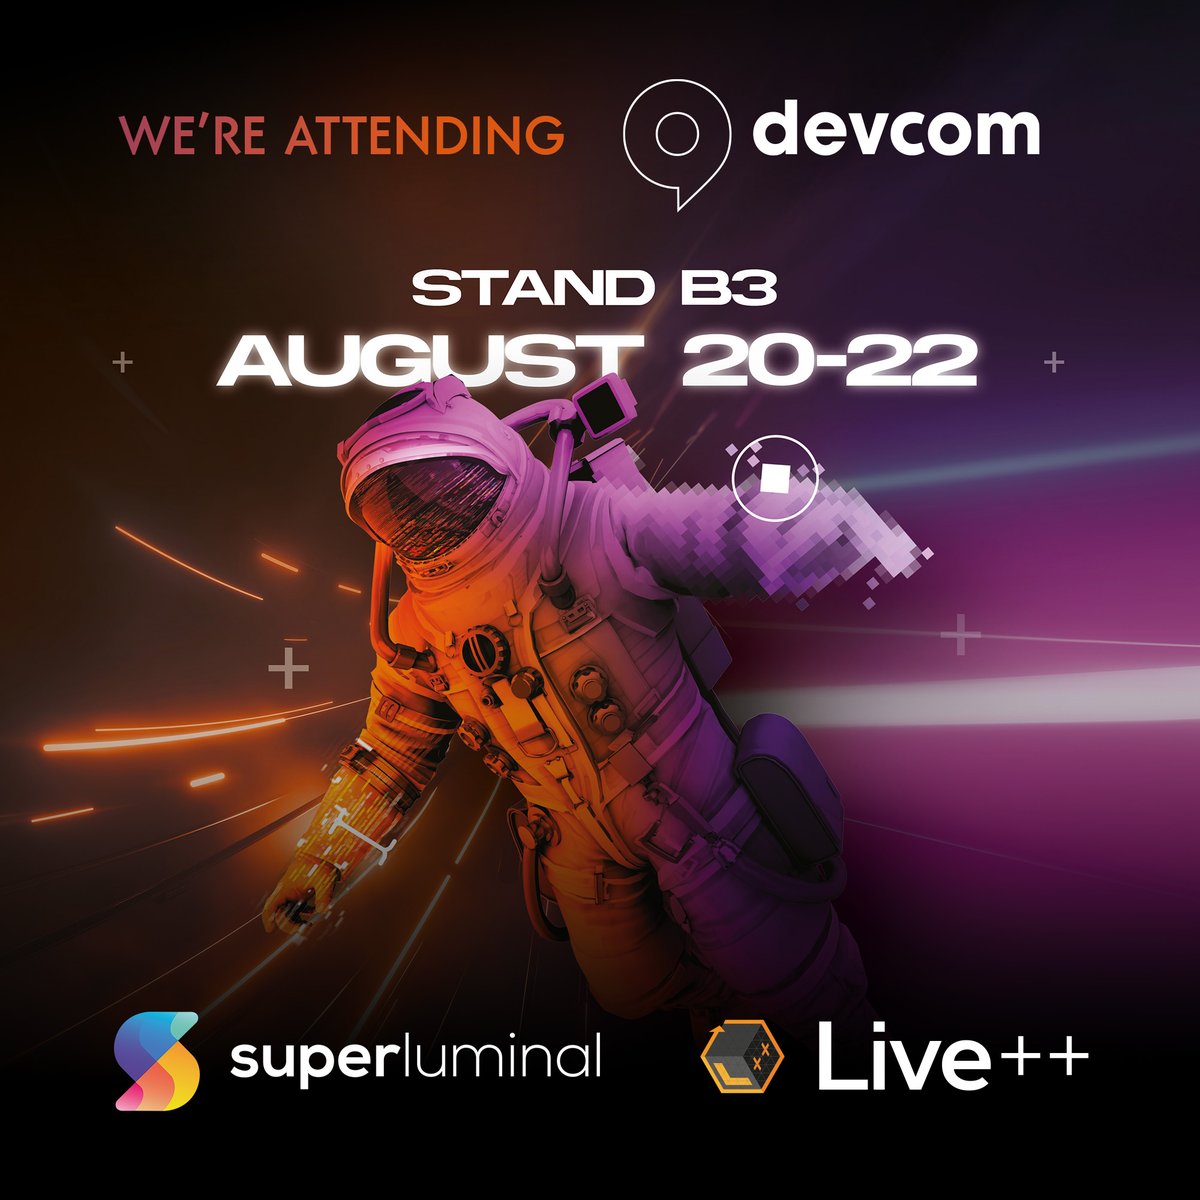 We partnered up with the amazing people from @SuperluminalSft and will be heading to devcom in Cologne in August!

Come see us at our booth - we'd love to meet you lovely people!

#gamescom2023 #ddc2023 #devcom2023